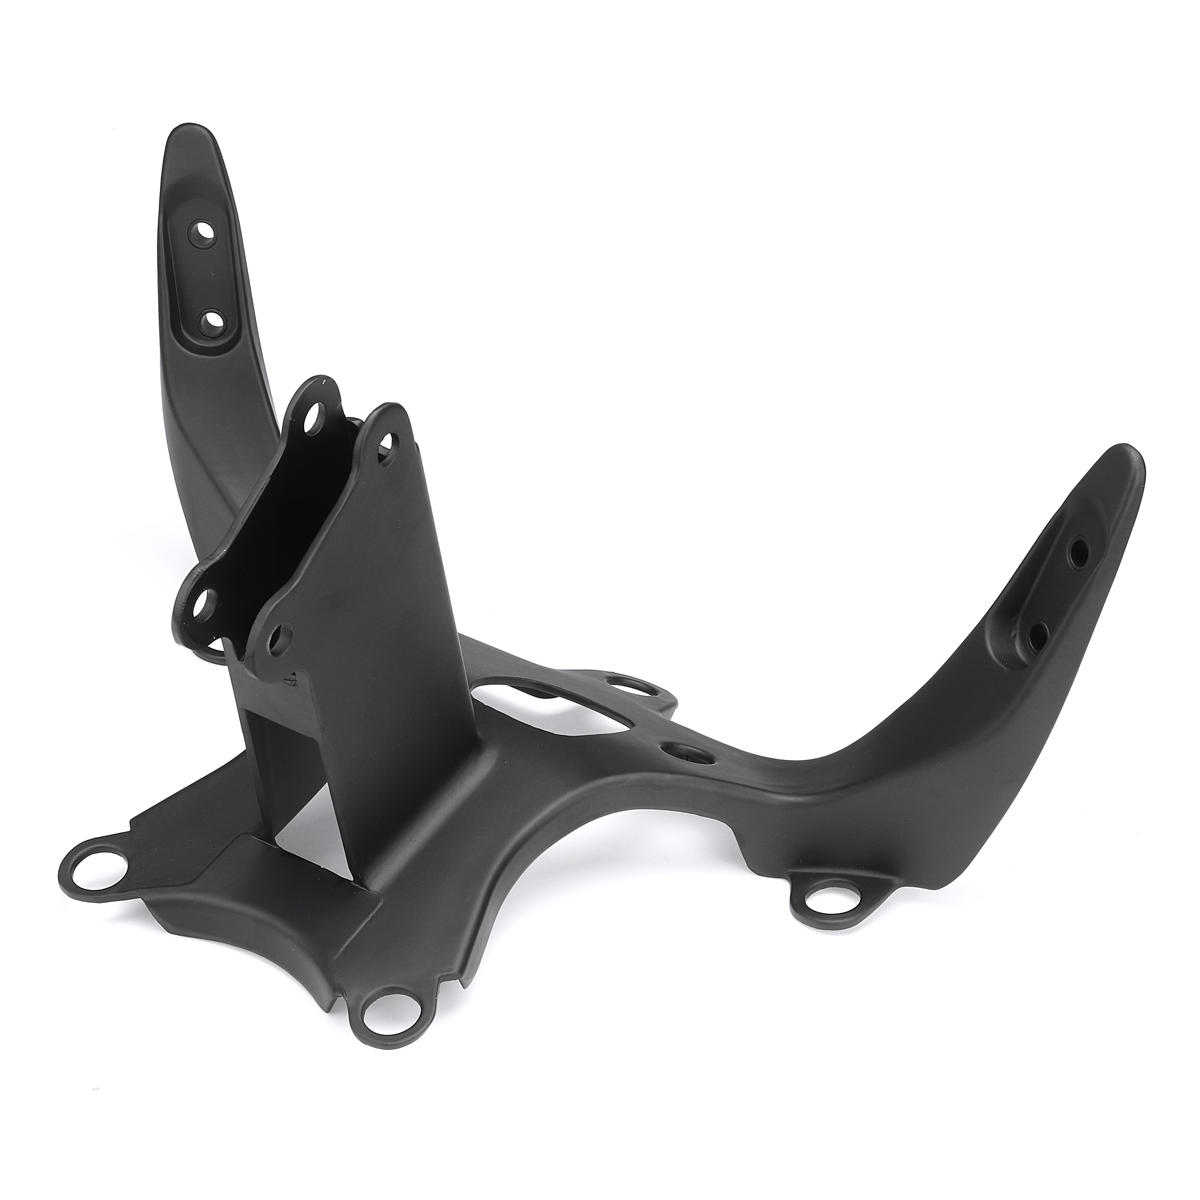 

Motorcycle Front Head Upper Fairing Stay Bracket For Yamaha R1 YZF-R1 2000-2001